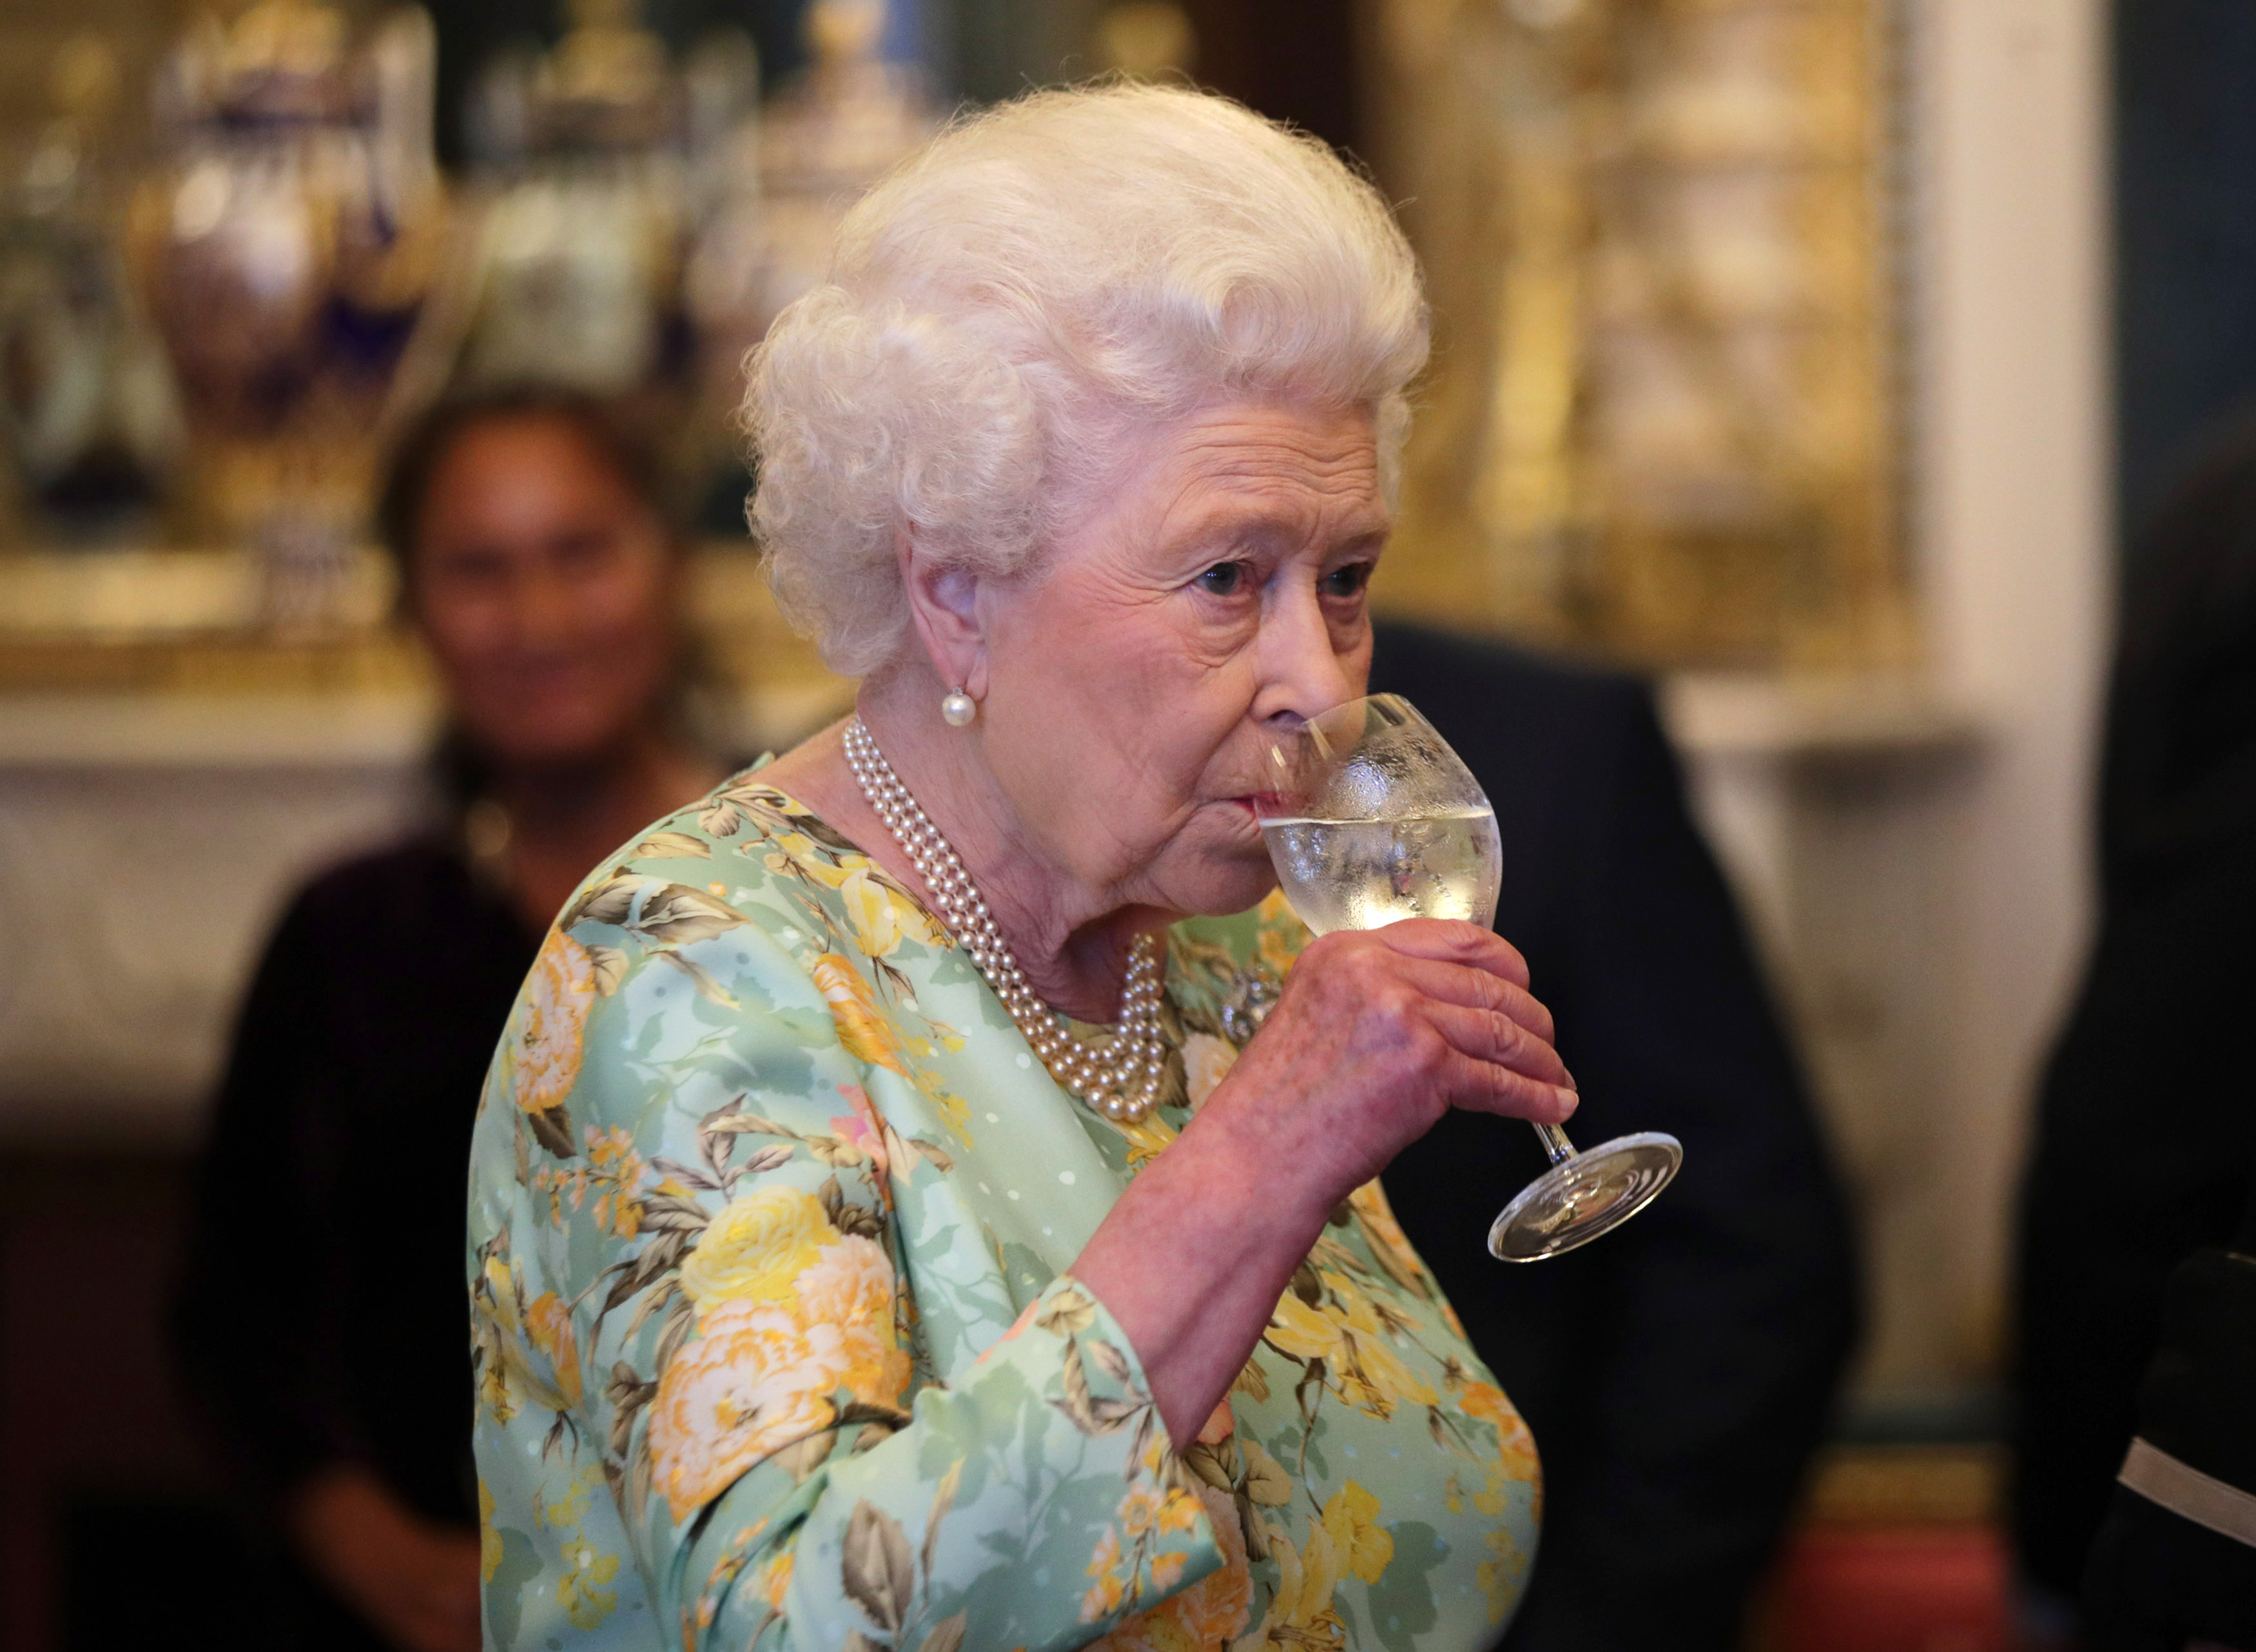 Queen Elizabeth Exclusively Drinks Bollinger Champagne, the Royal Family’s Favorite Brand